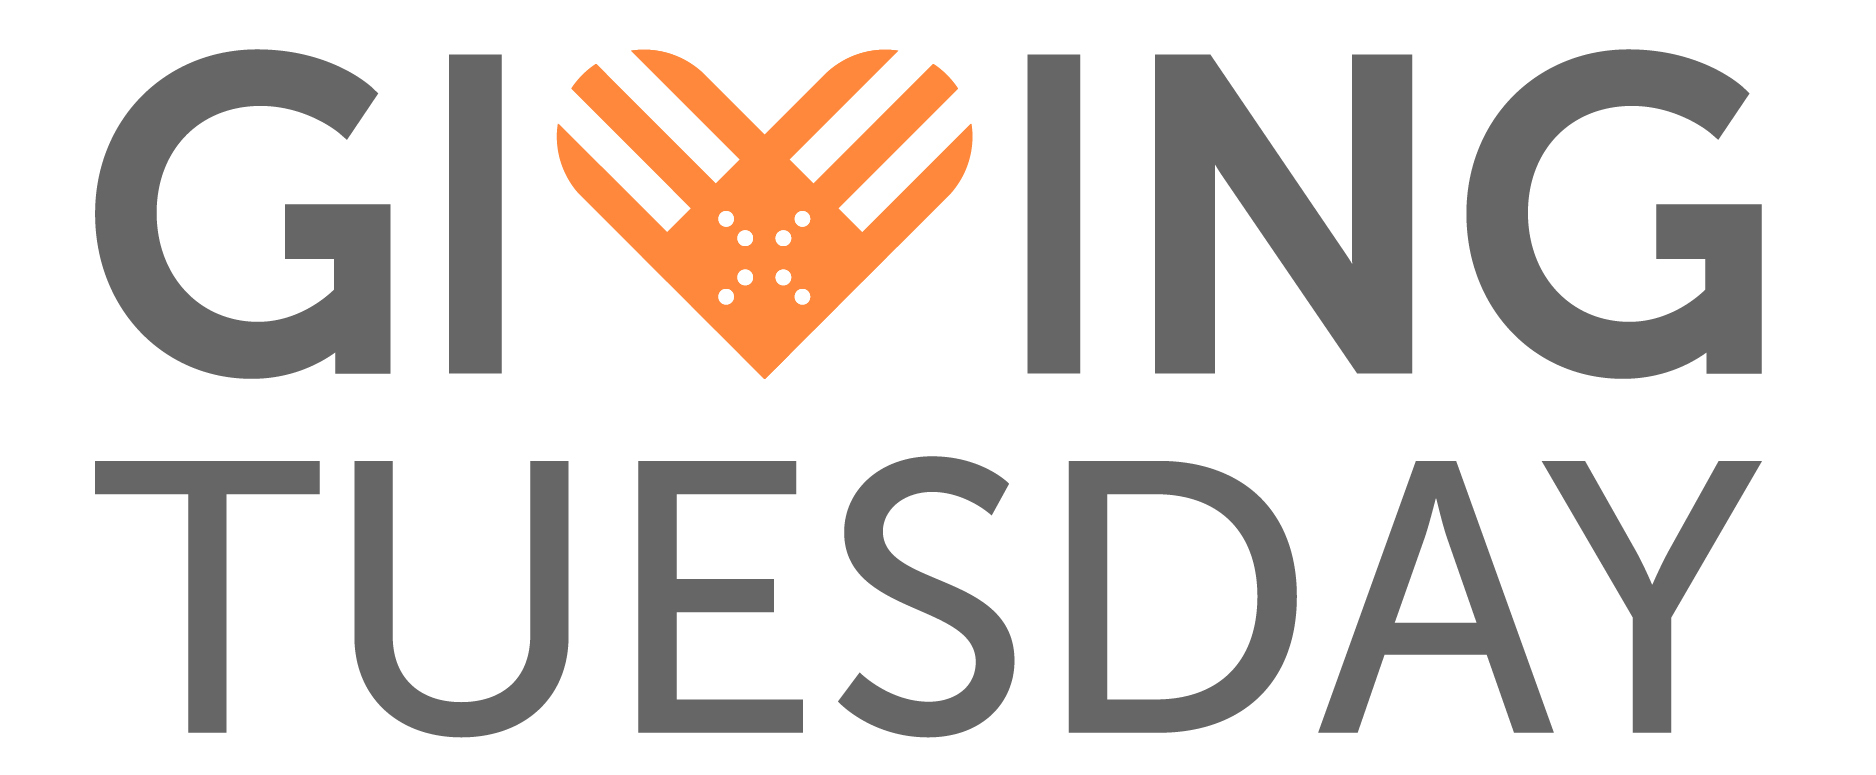 2023 X by 2 Giving Tuesday Virtual Food Drive